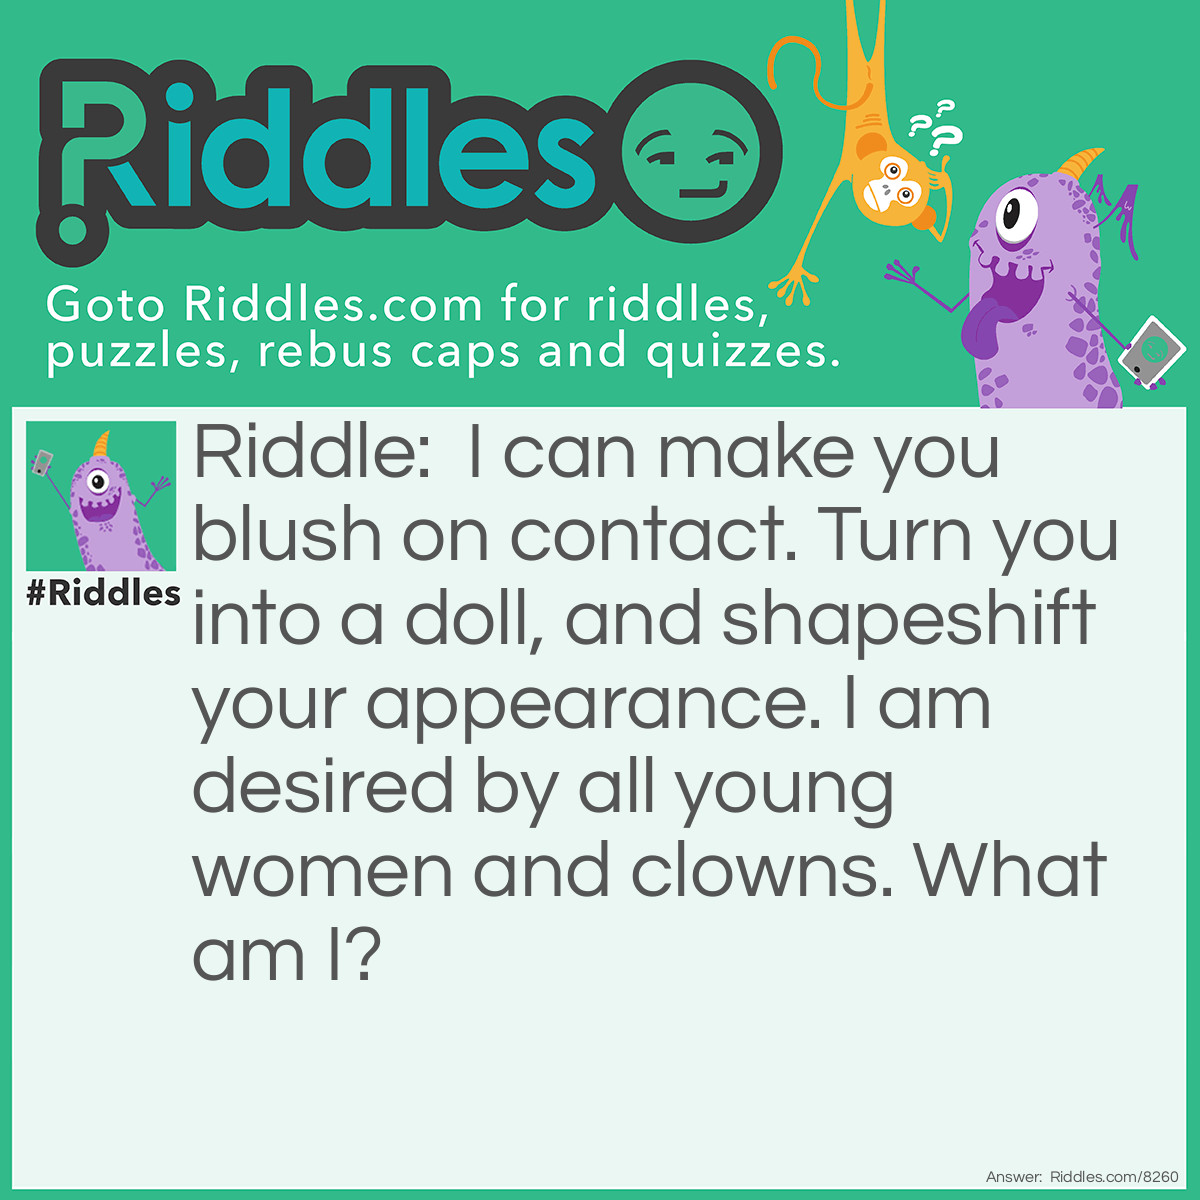 Riddle: I can make you blush on contact. Turn you into a doll, and shapeshift your appearance. I am desired by all young women and clowns. What am I? Answer: Makeup.